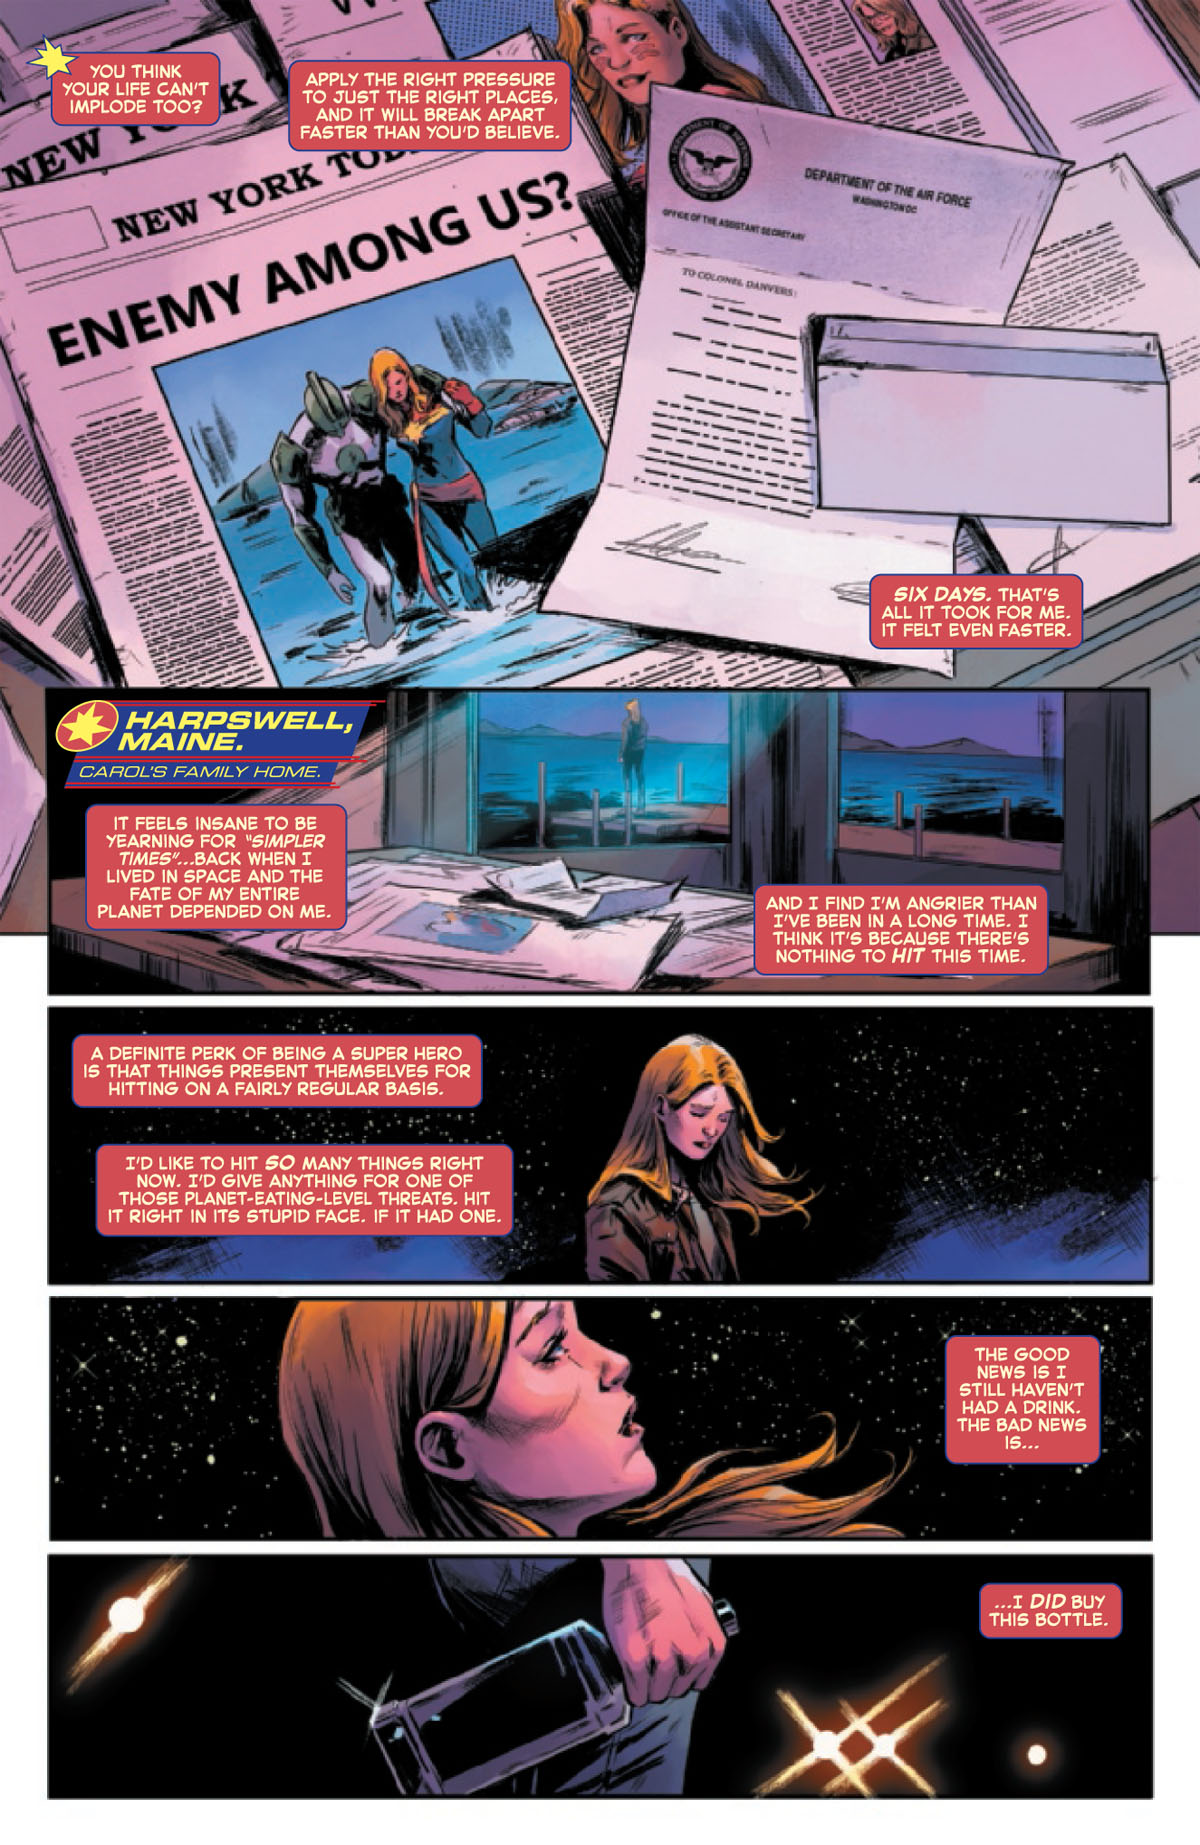 Captain Marvel #8 page 1